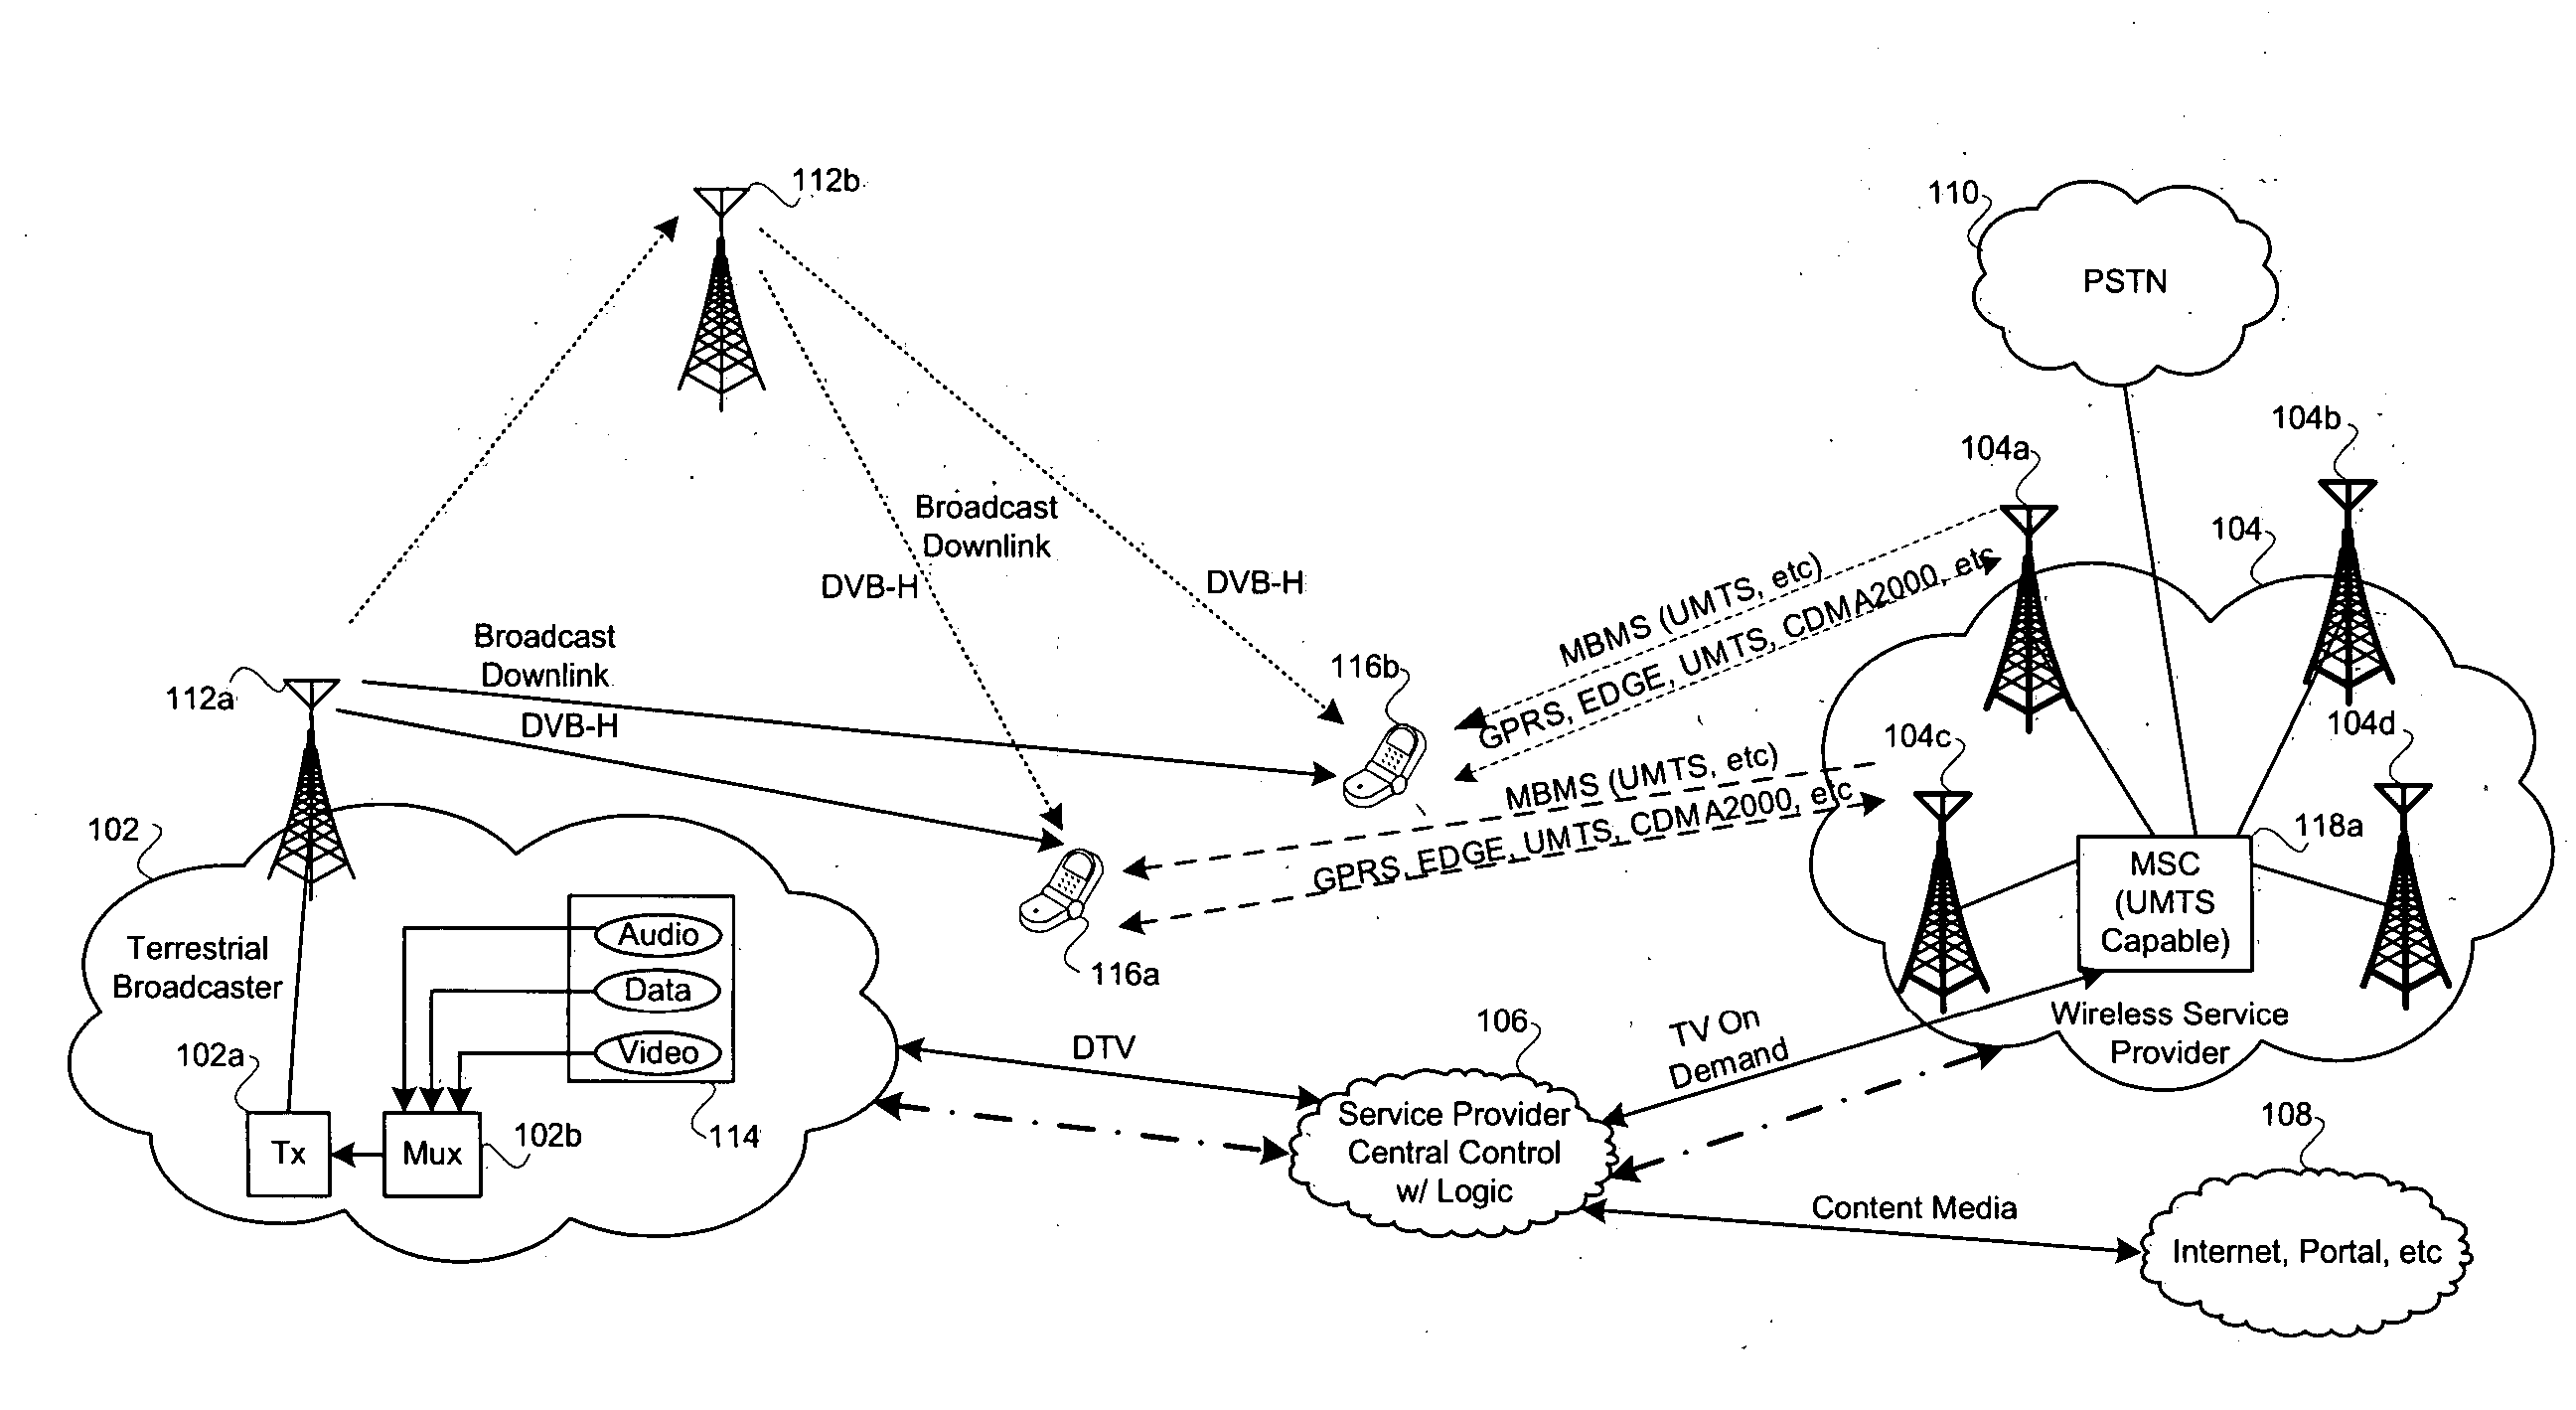 Method and system for cellular network and integrated broadcast television (TV) downlink with intelligent service control without feedback